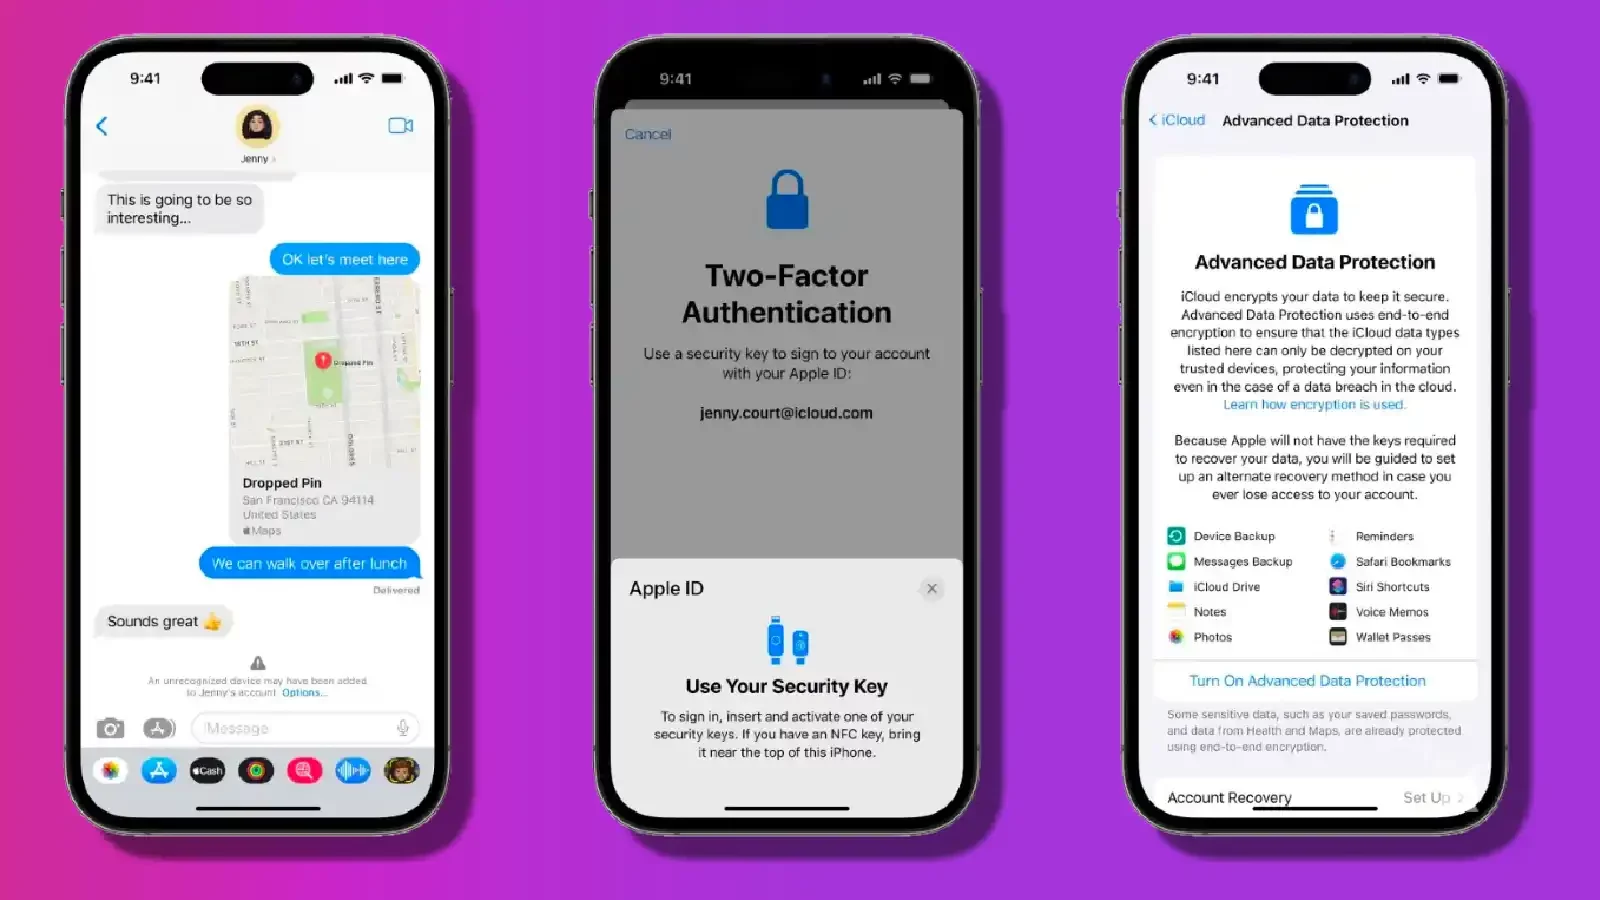 Apple Advanced Data Protection screenshots for iPhone, iPad, and Mac on a purple background